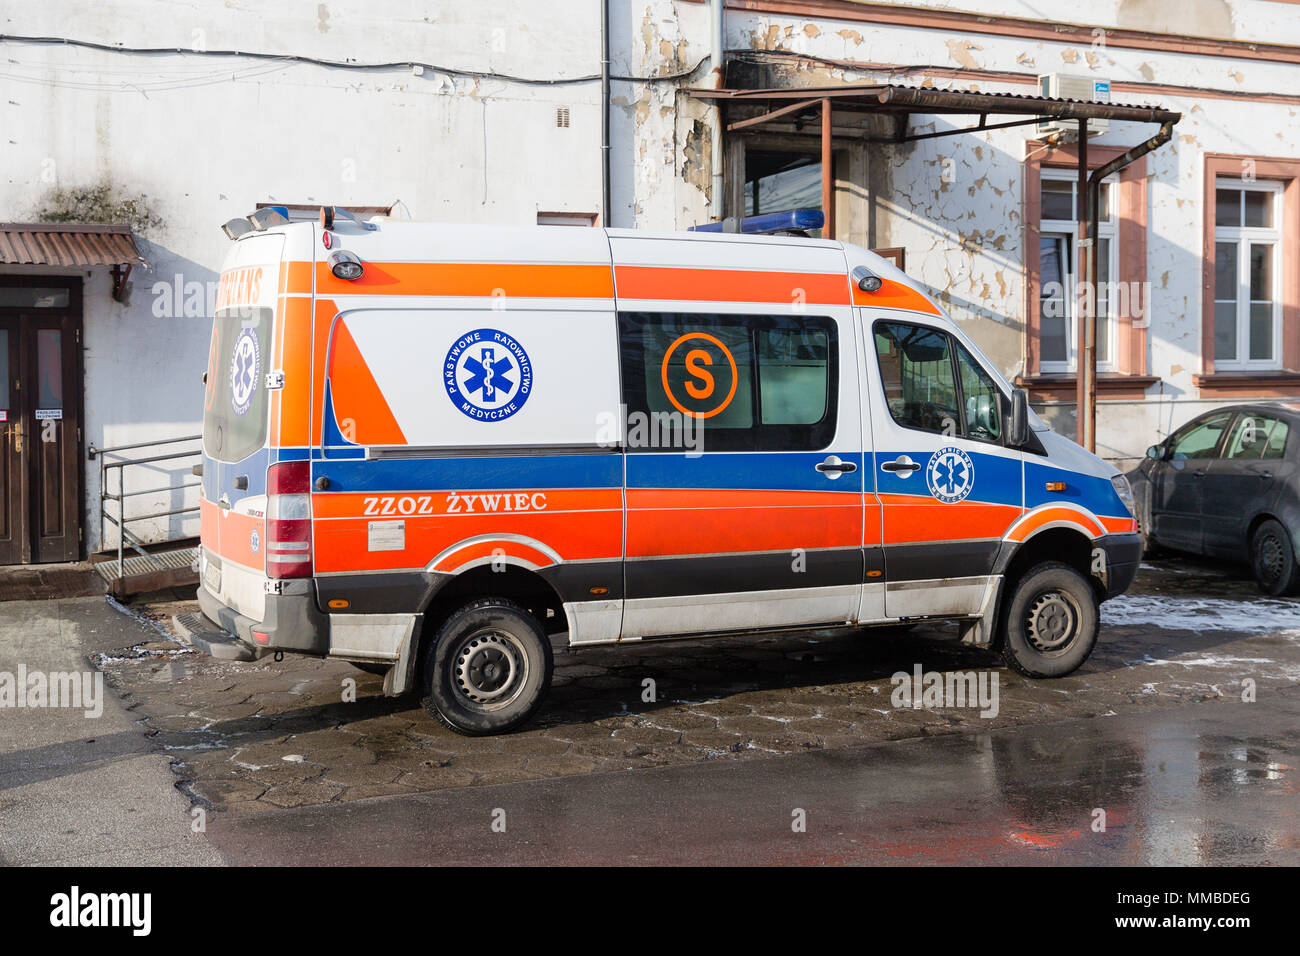 Parked ambulance at the County Hospital in Zywiec, Poland. Medical rescue vehicle. Hospital emergency transport. Stock Photo